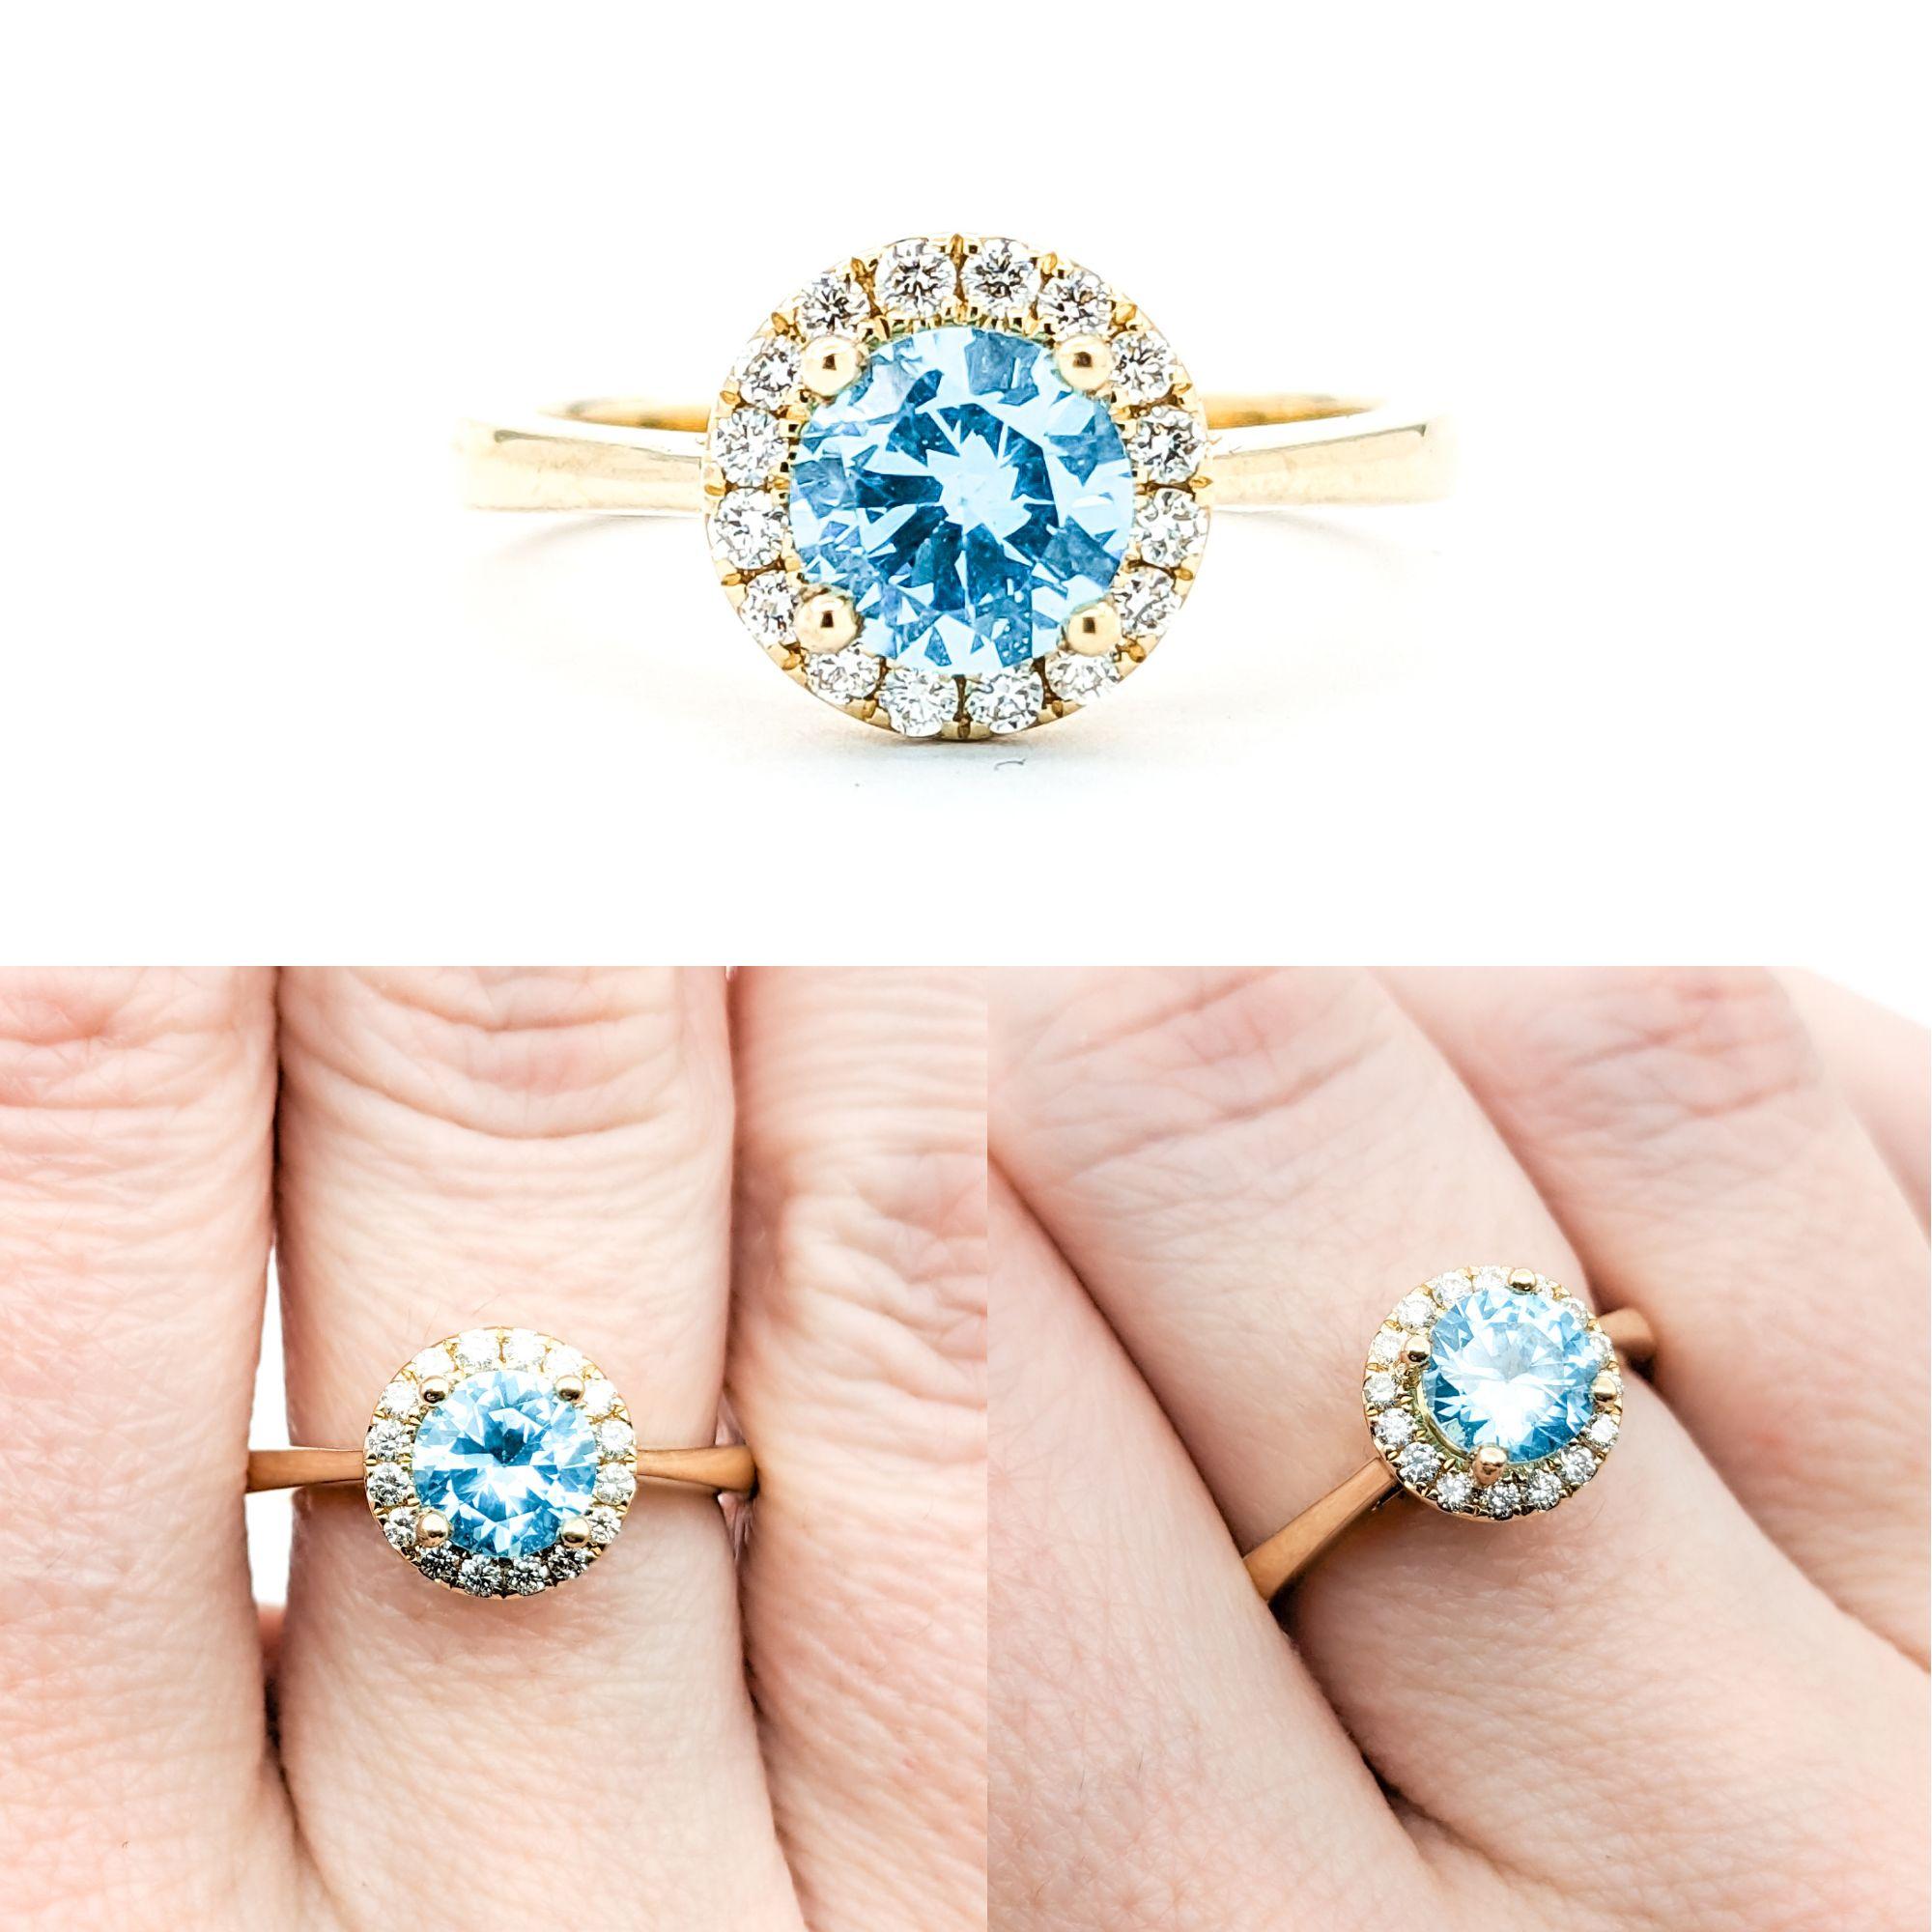 1.40ct Blue Zircon & Diamond Ring In Yellow Gold

Introducing this elegant Ring crafted in 14kt white gold. It features a captivating 1.40ct Blue Zircon centerpiece complemented by .18ctw of Round Diamonds. The sparkling diamonds are of SI clarity